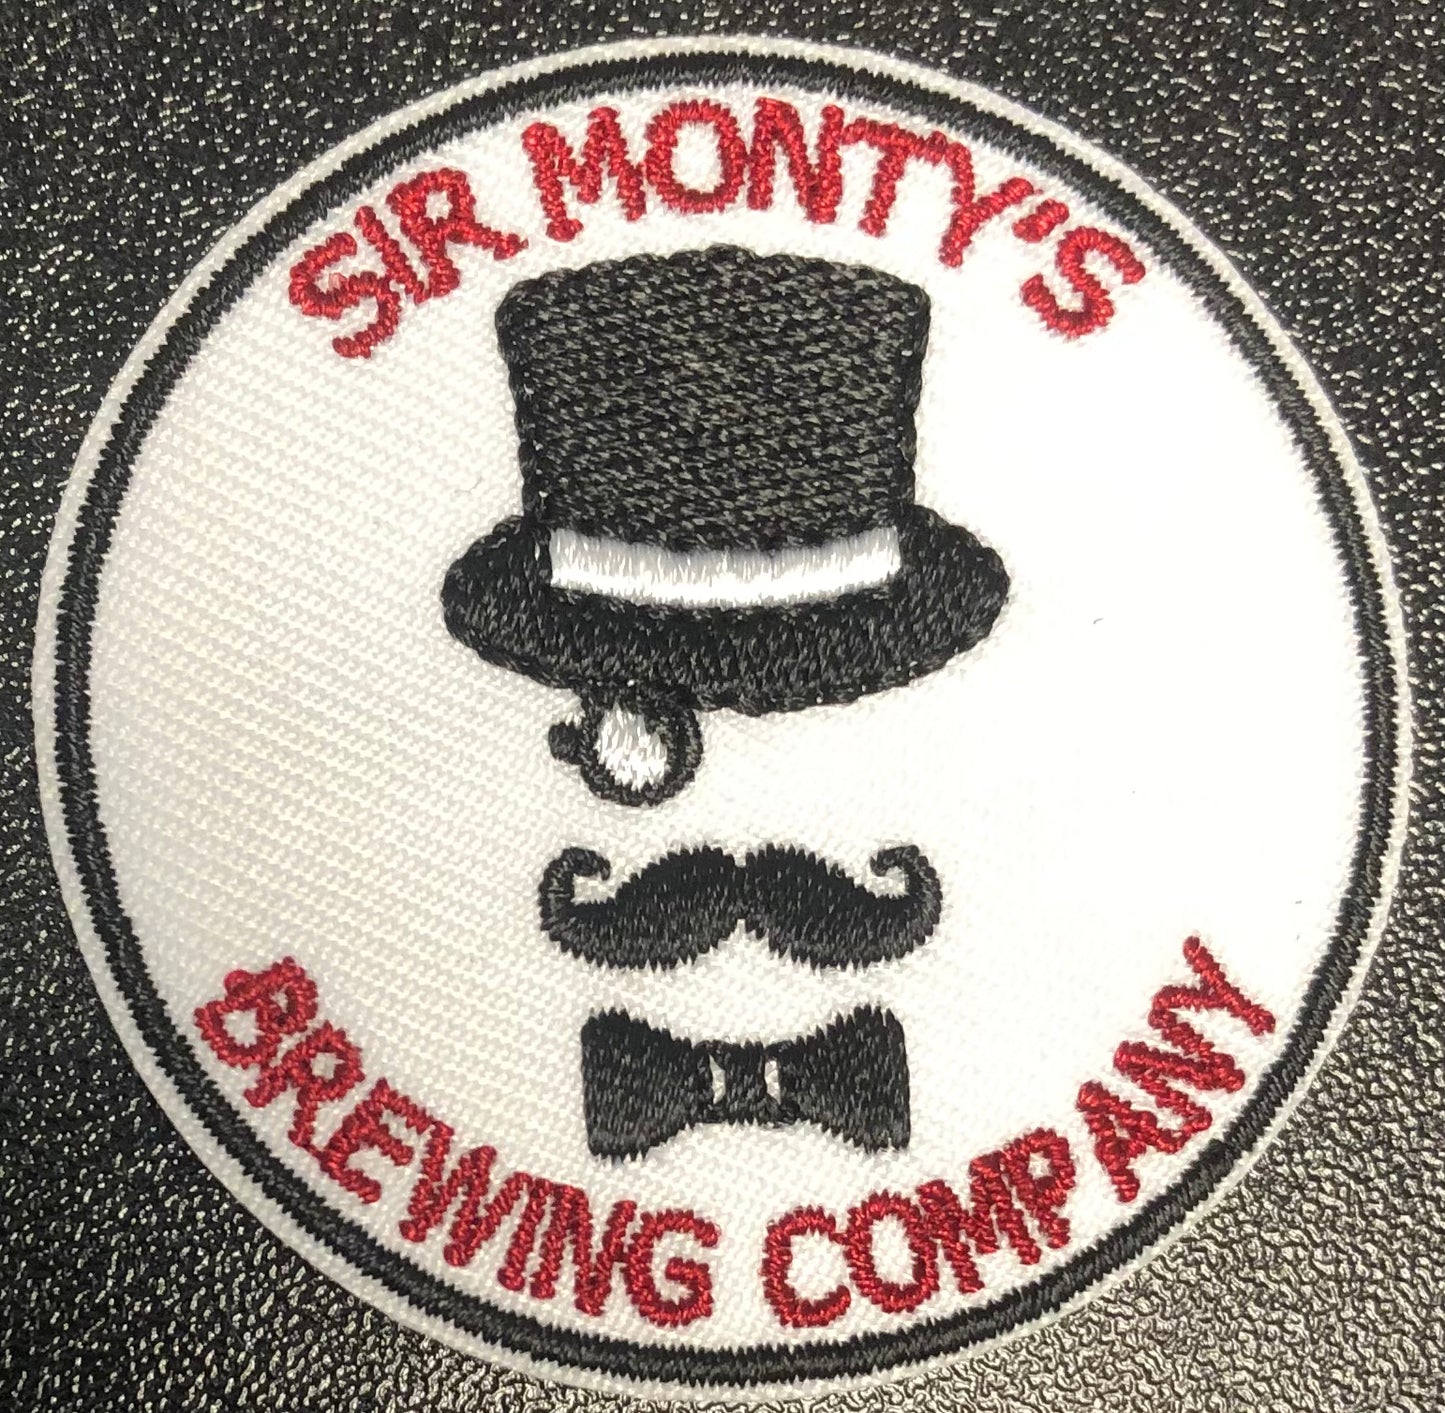 Sir Monty’s Embroidered Patch 2” Diameter